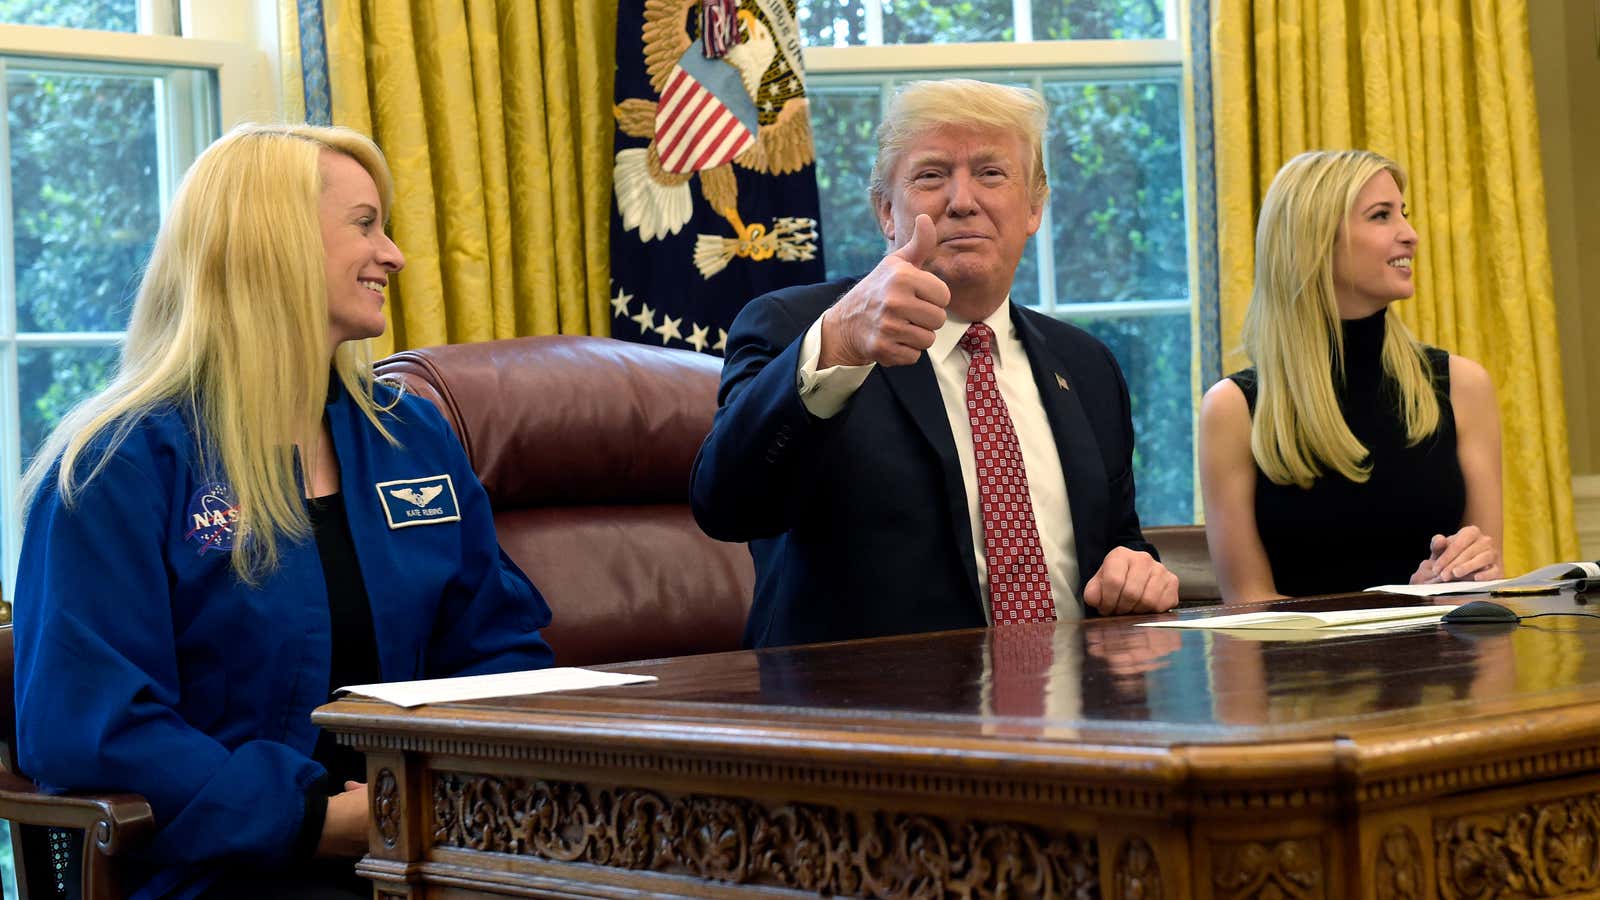 Donald Trump and an astronaut earlier this year.